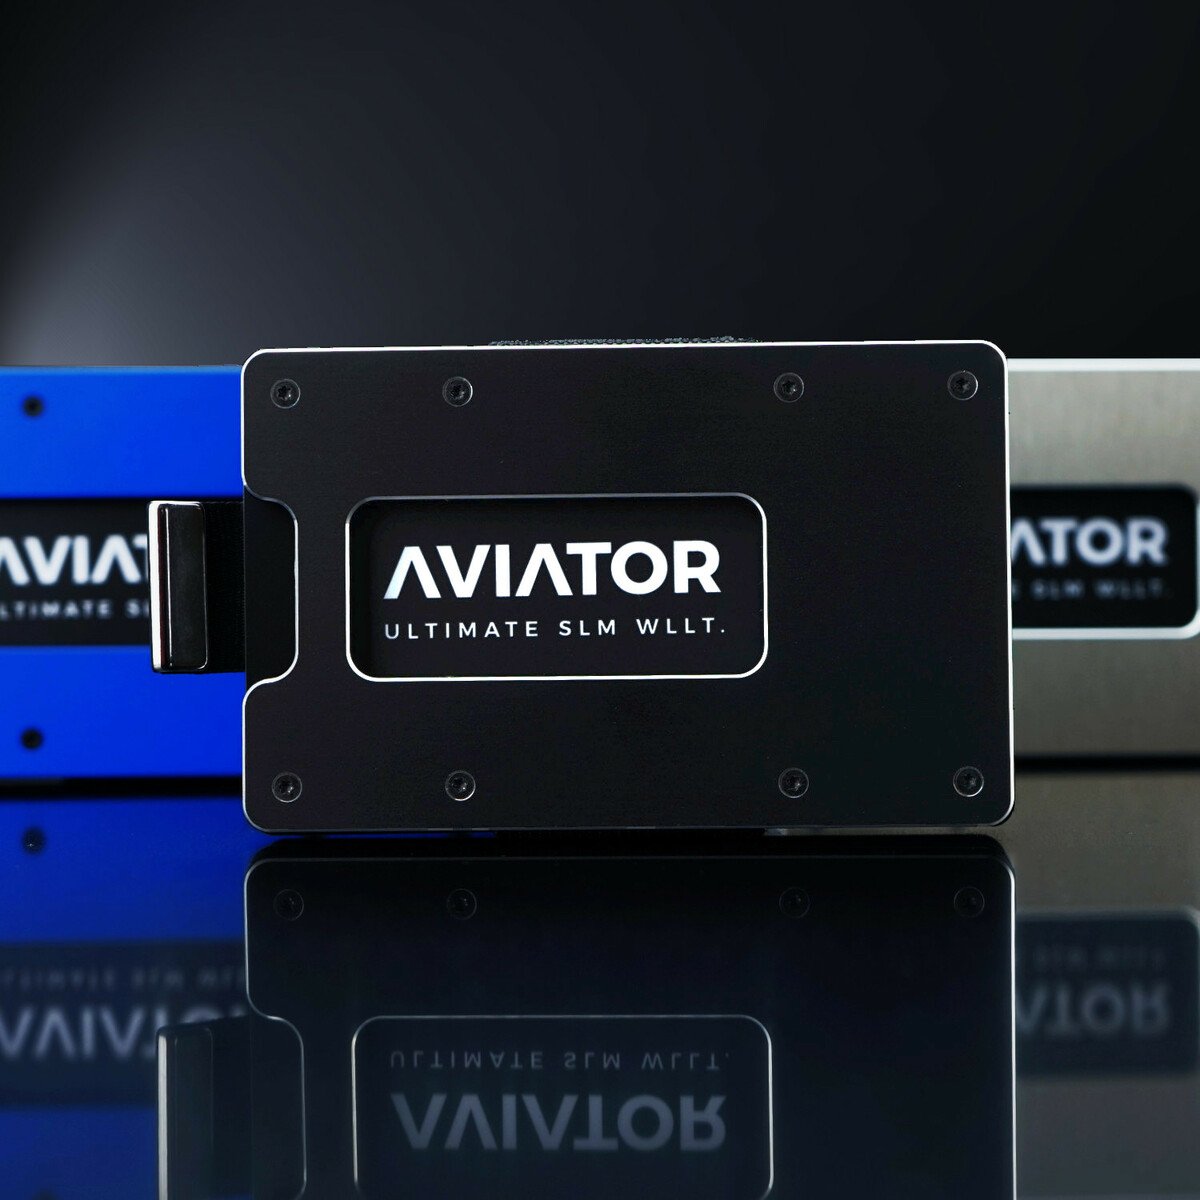 Aviator Wallet: Configure your desired aviator and get a Accessory